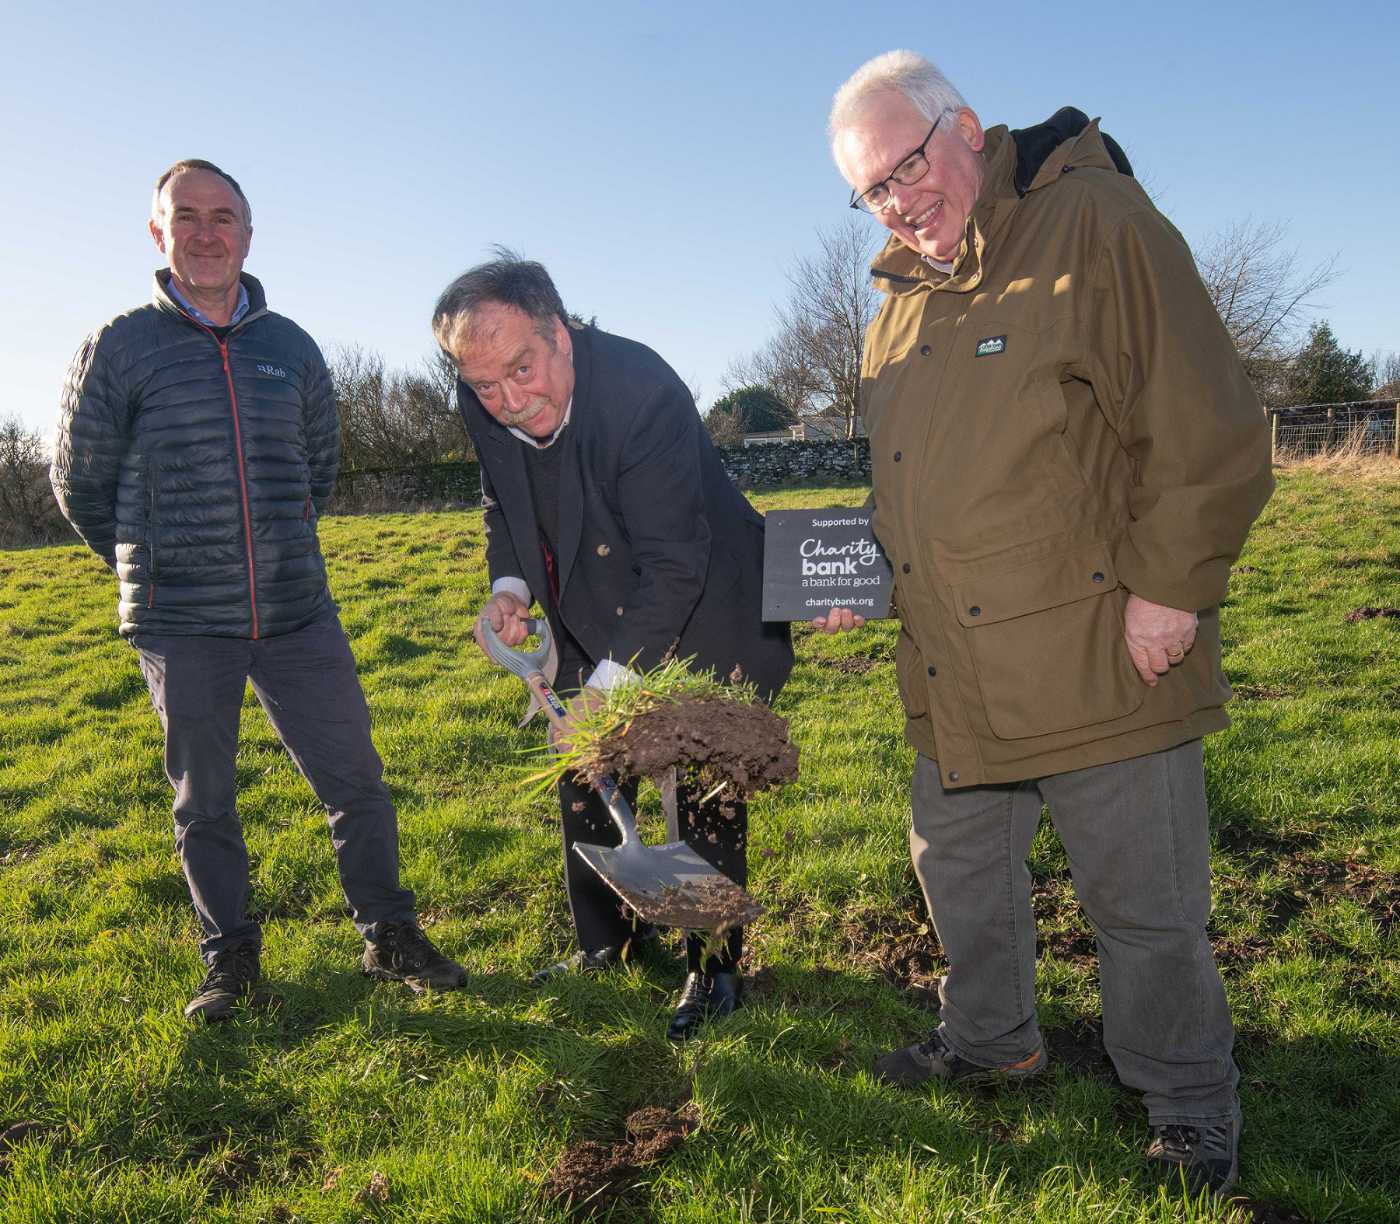 The groundbreaking ceremony for the new Hudswell affordable homes development took place this week with North Yorkshire Council’s executive member for housing, Cllr Simon Myers (centre), the Charity Bank’s regional manager, Jeremy Ince (left), and Hudswell Community Charity’s secretary, Martin Booth